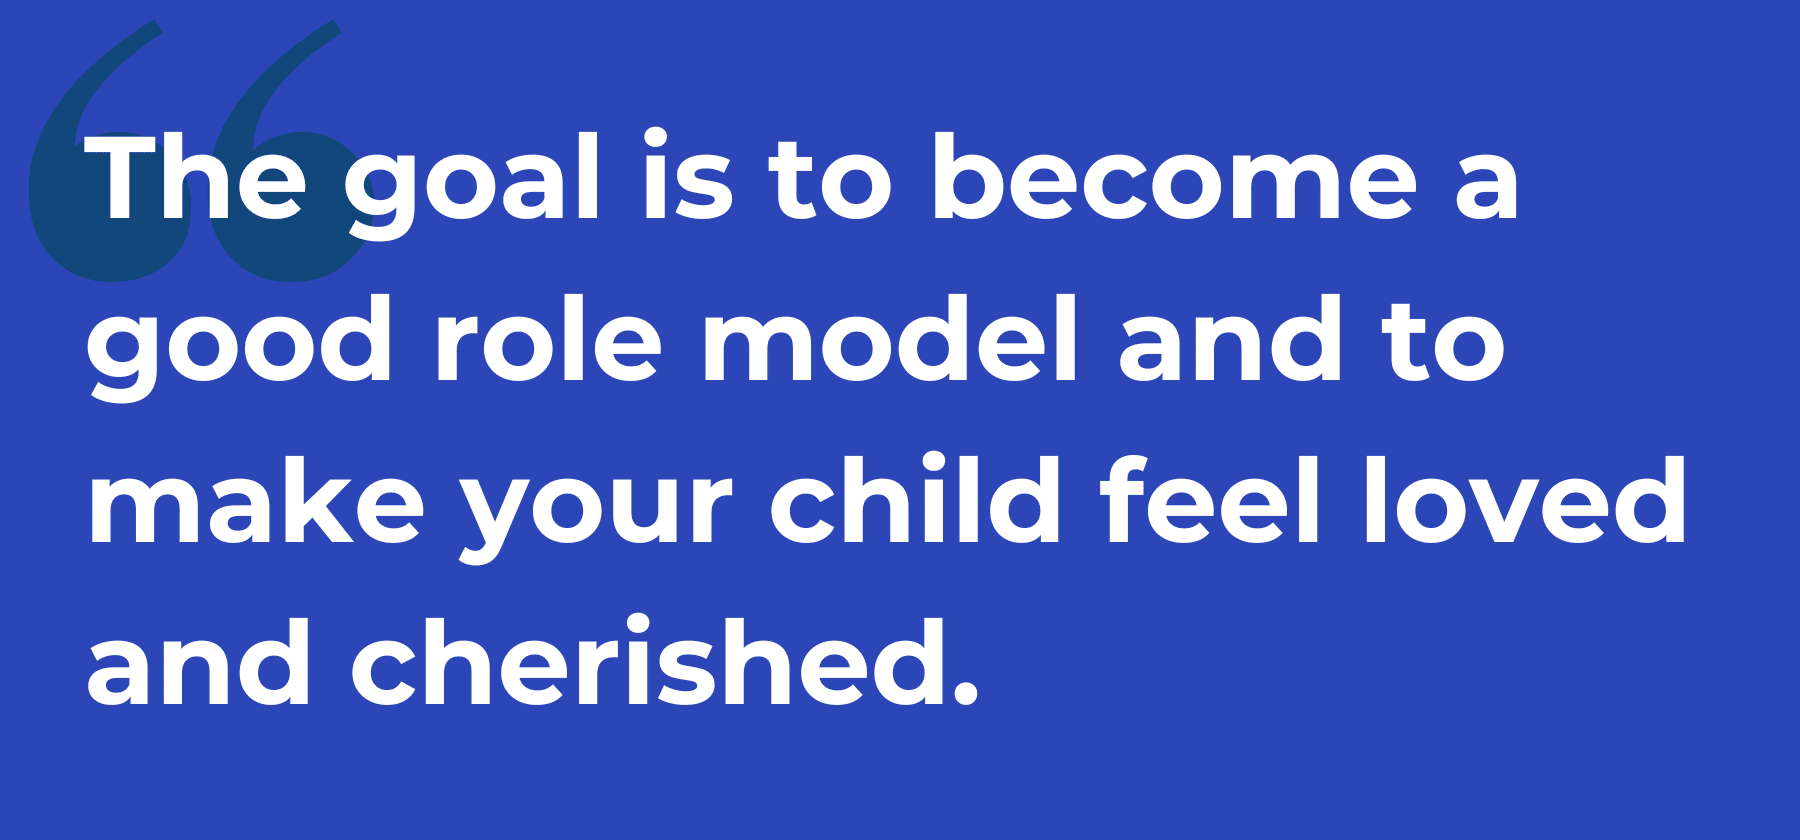 The goal is to become a good role model and to make your child feel loved and cherished